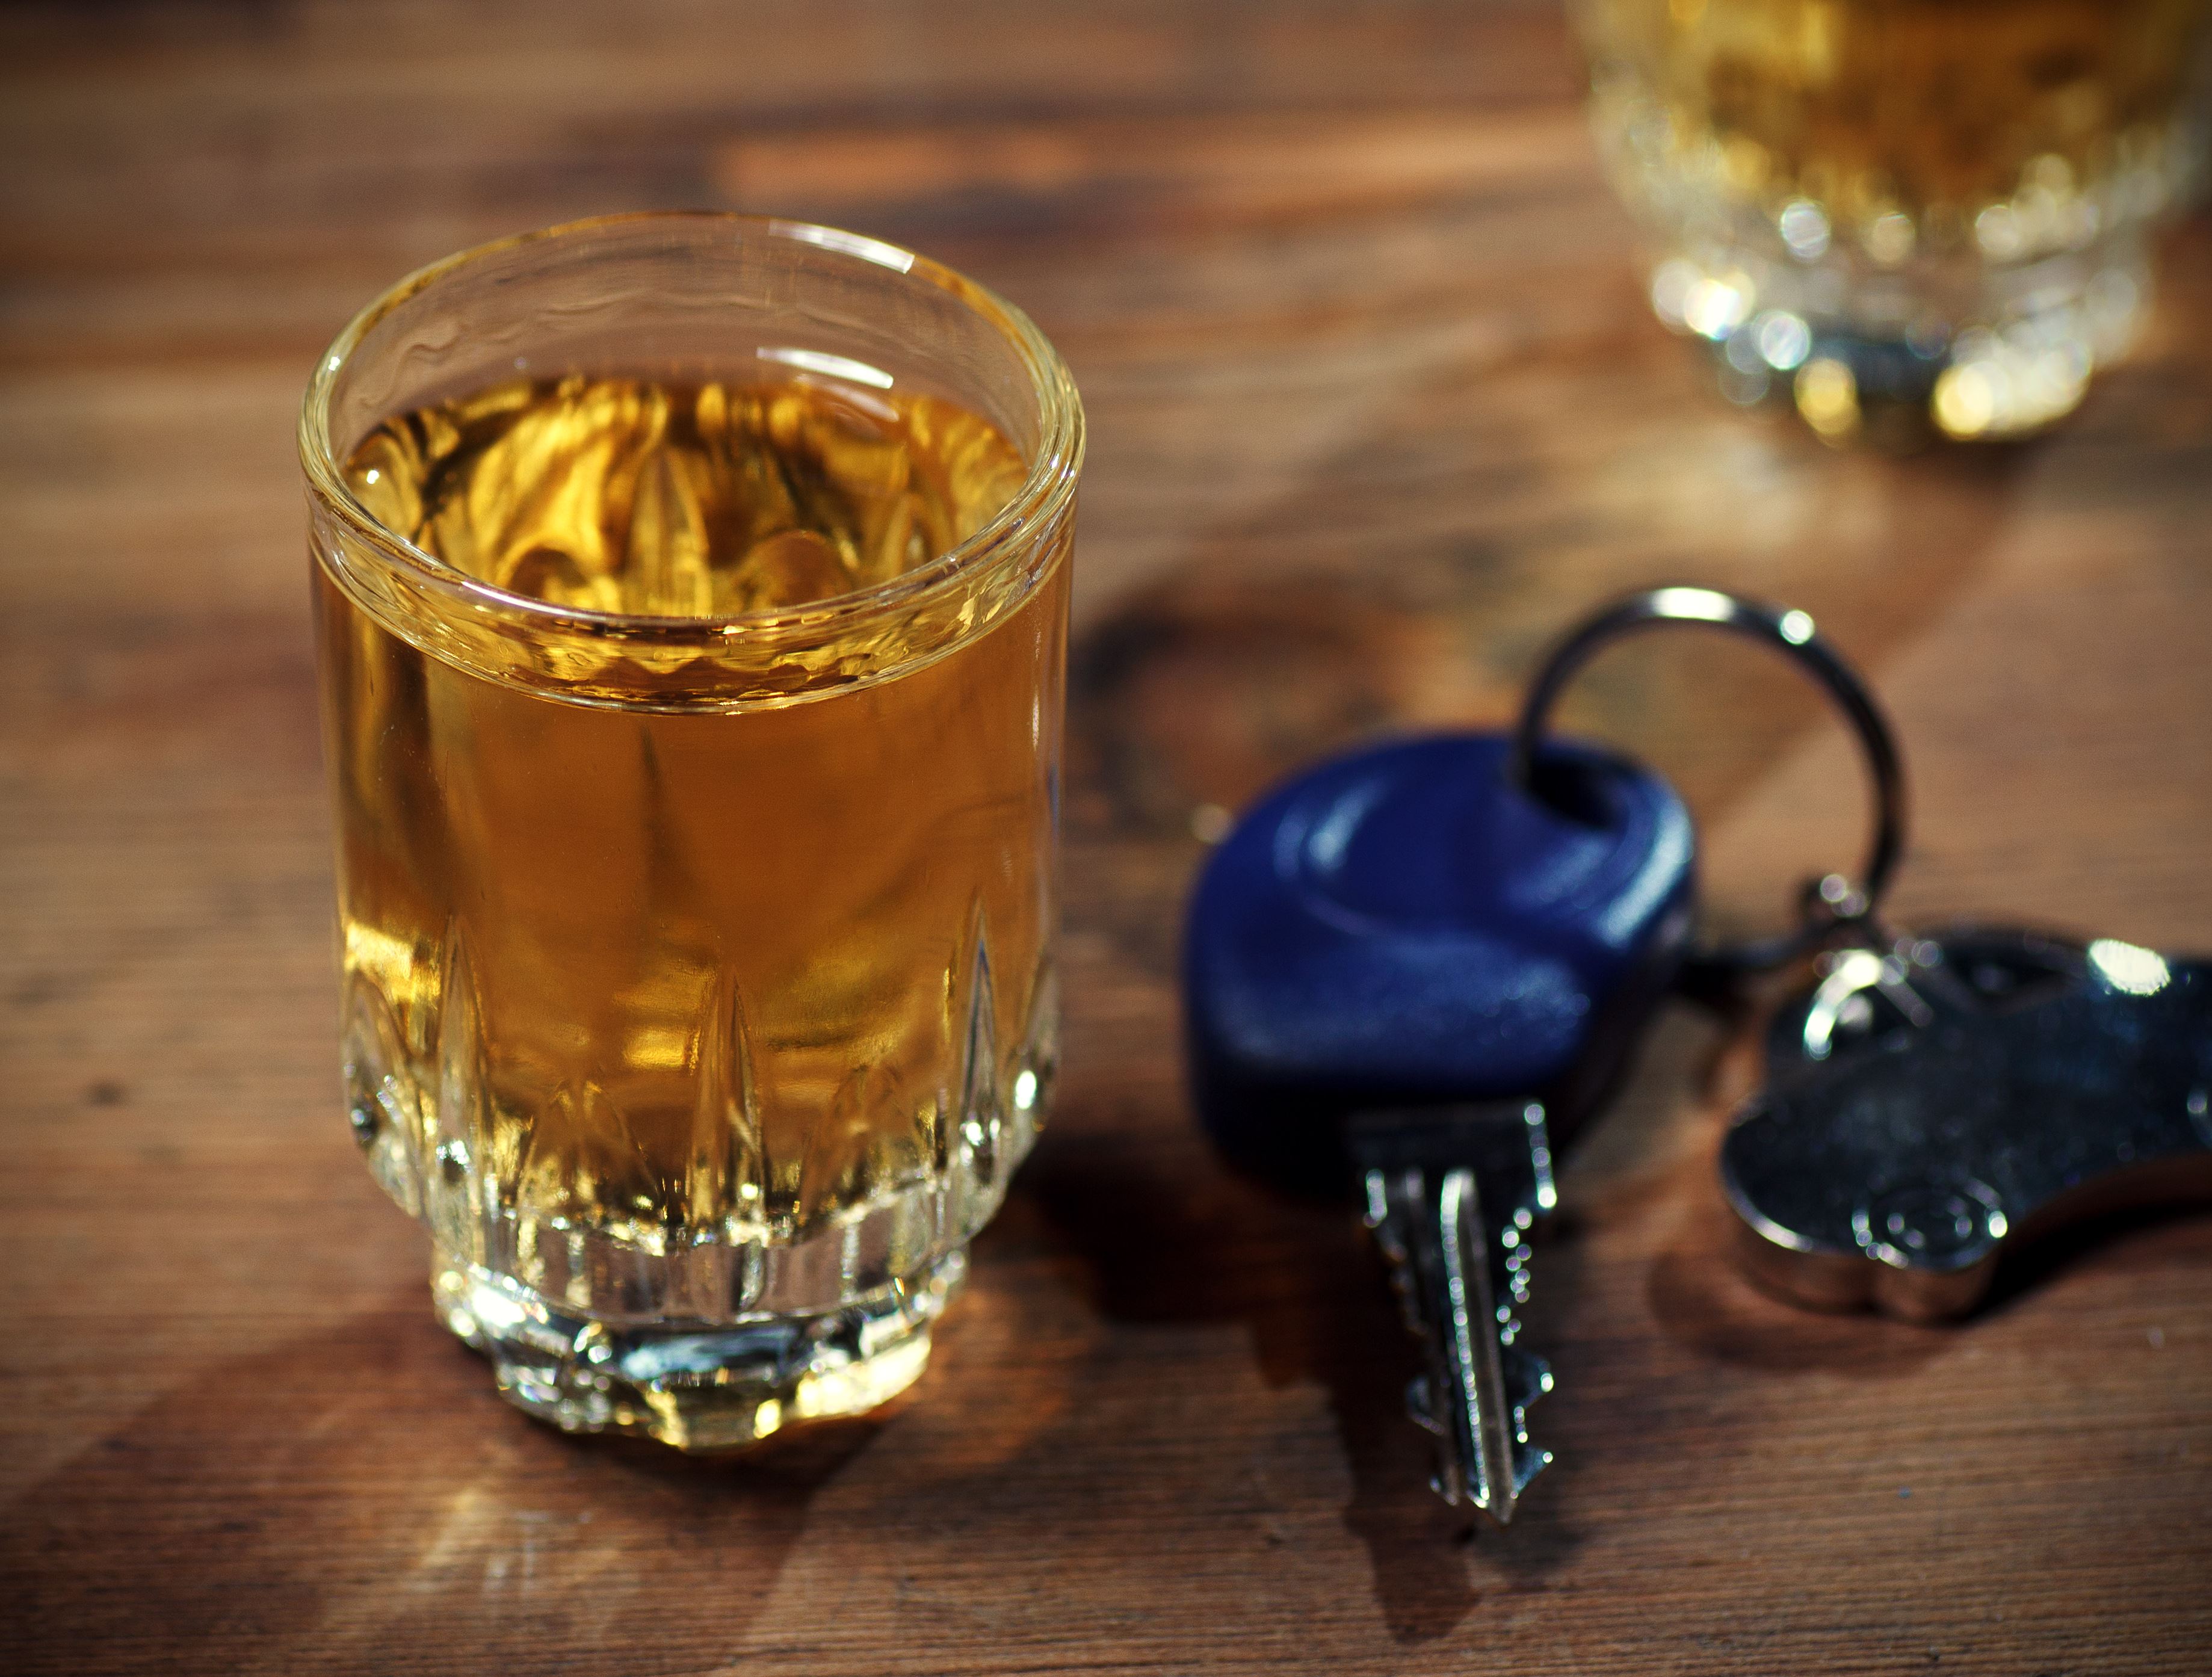 A shot of whiskey on a wooden table next to car keys